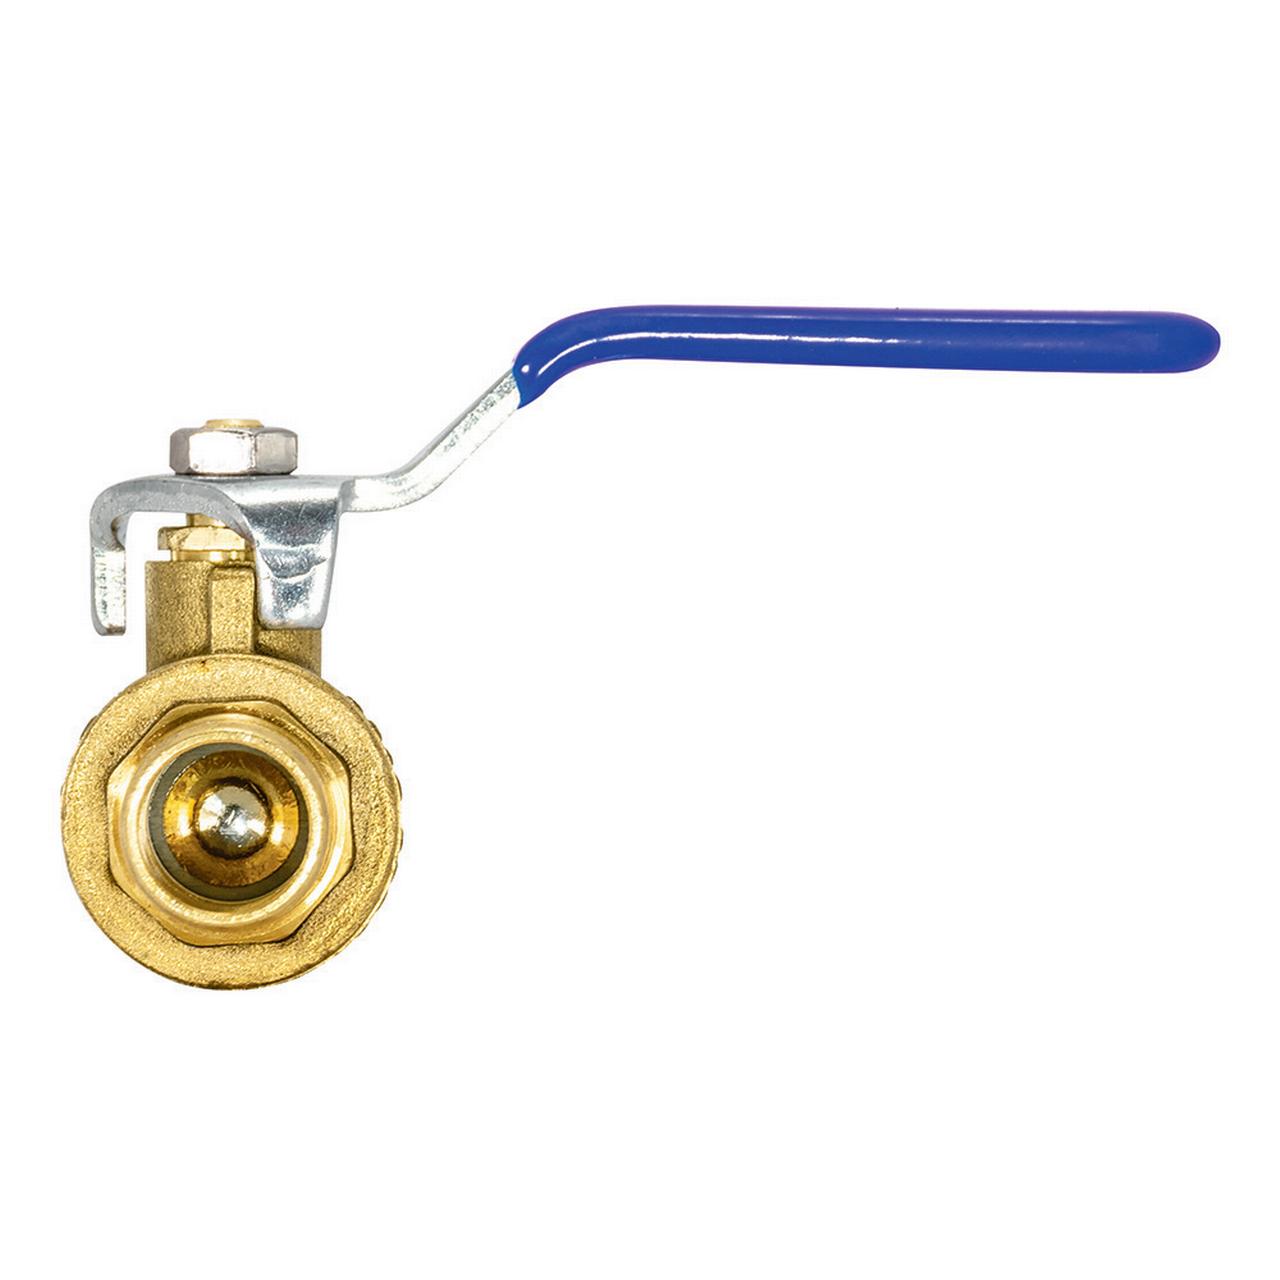 Eastman 20094LF Heavy-Duty PEX Ball Valve with Handle, 3/4 inch, Brass - image 5 of 6